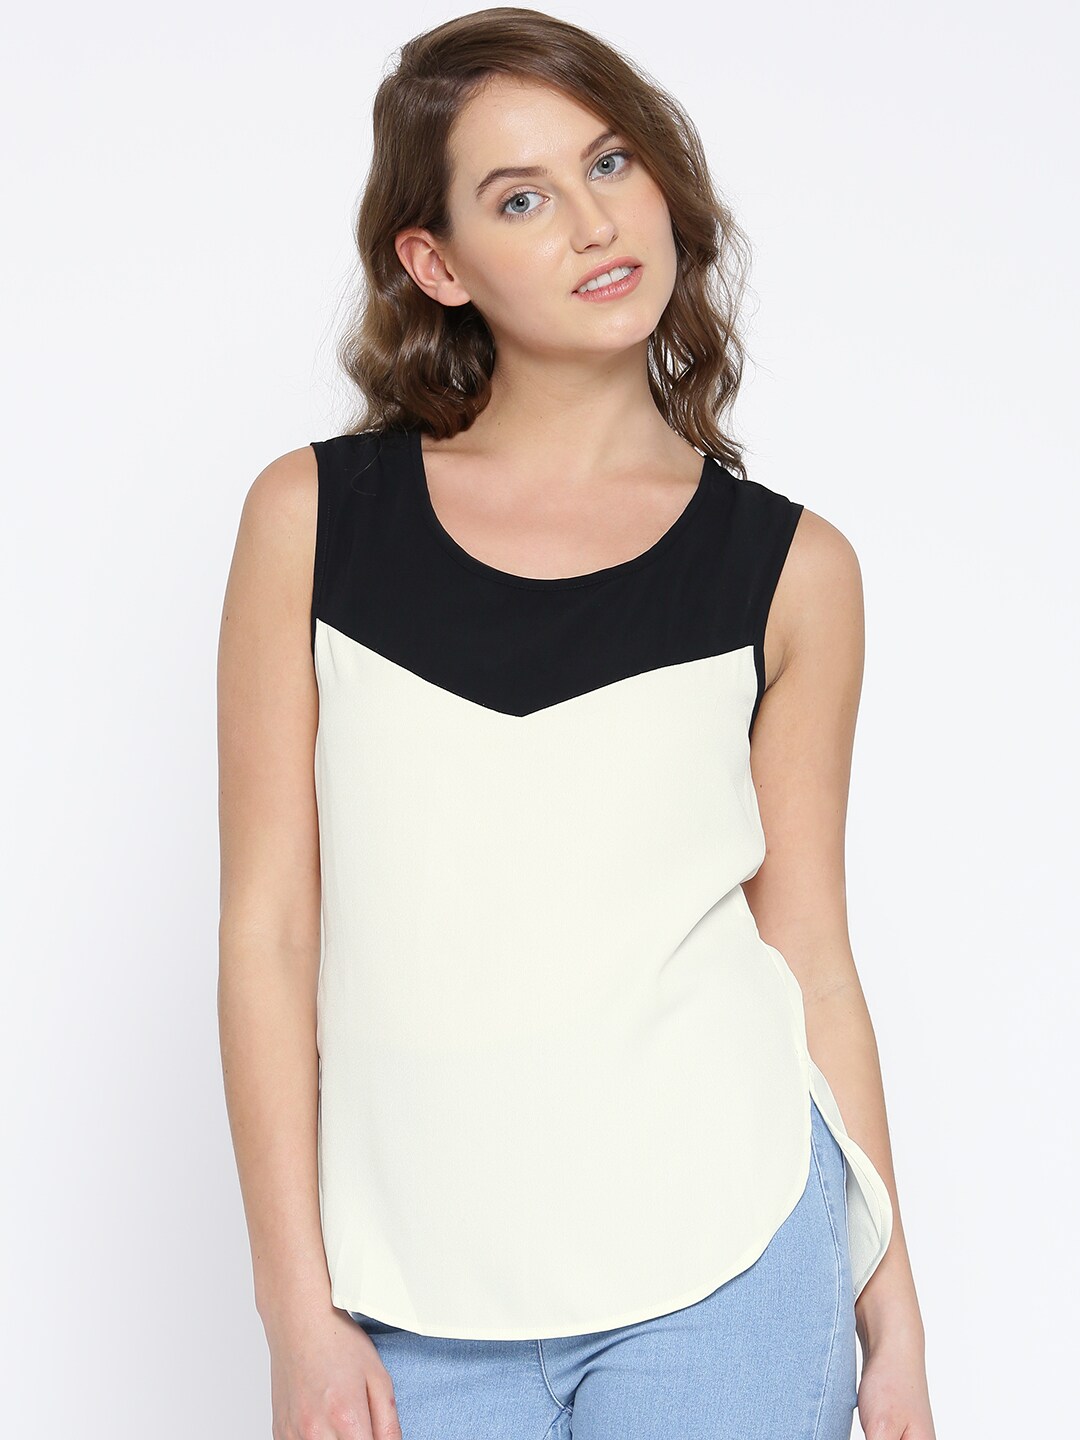 United Colors of Benetton Women Black & Off-White Top Price in India